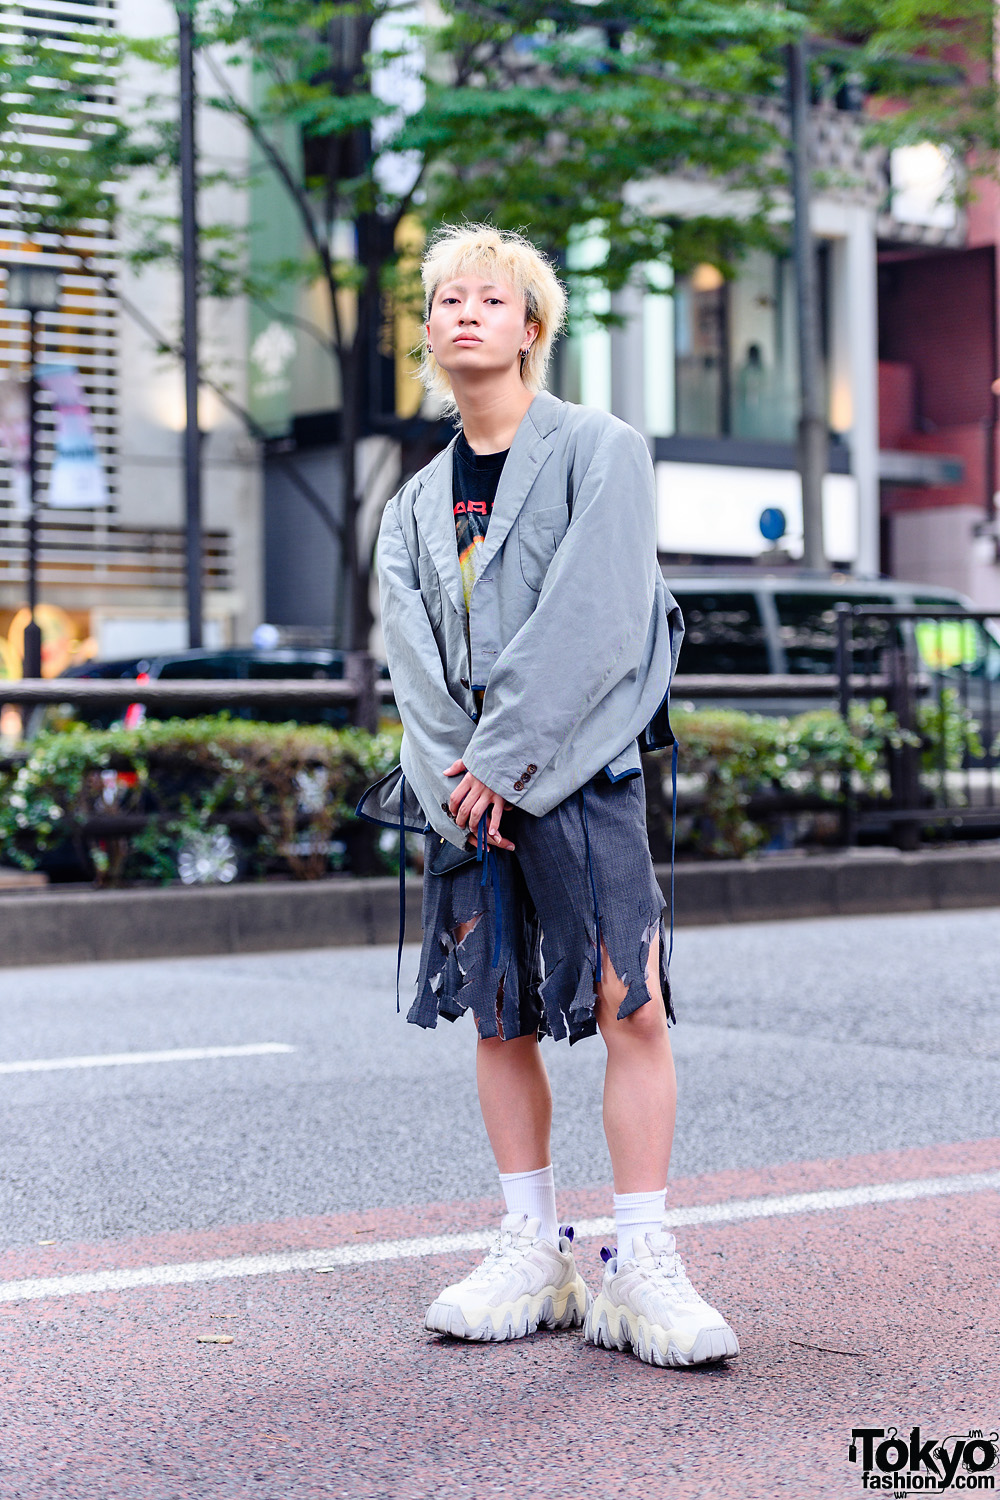 Deconstructed Tokyo Streetwear Style w/ Blonde Pageboy Cut, Comme 